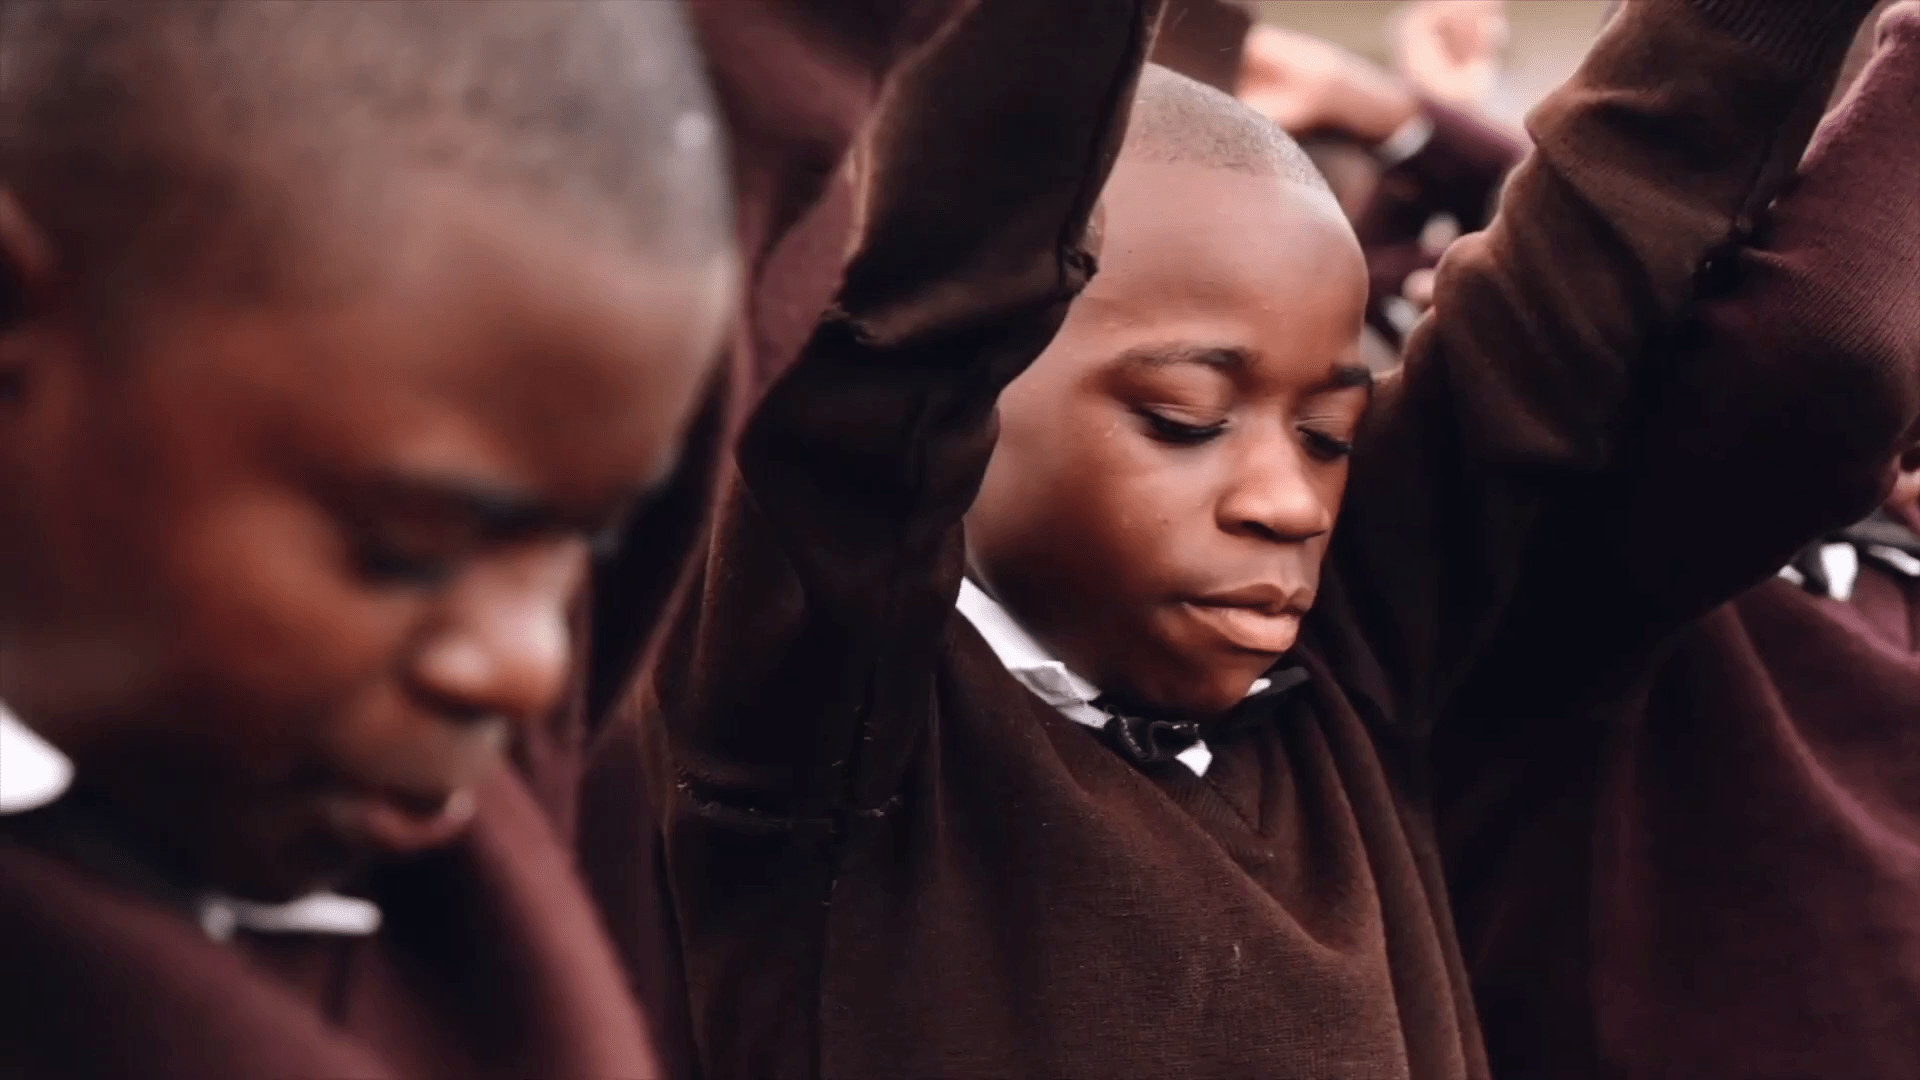 Christ for all Nation has launched a campaign to reach a million children across Africa with a clear Gospel message.